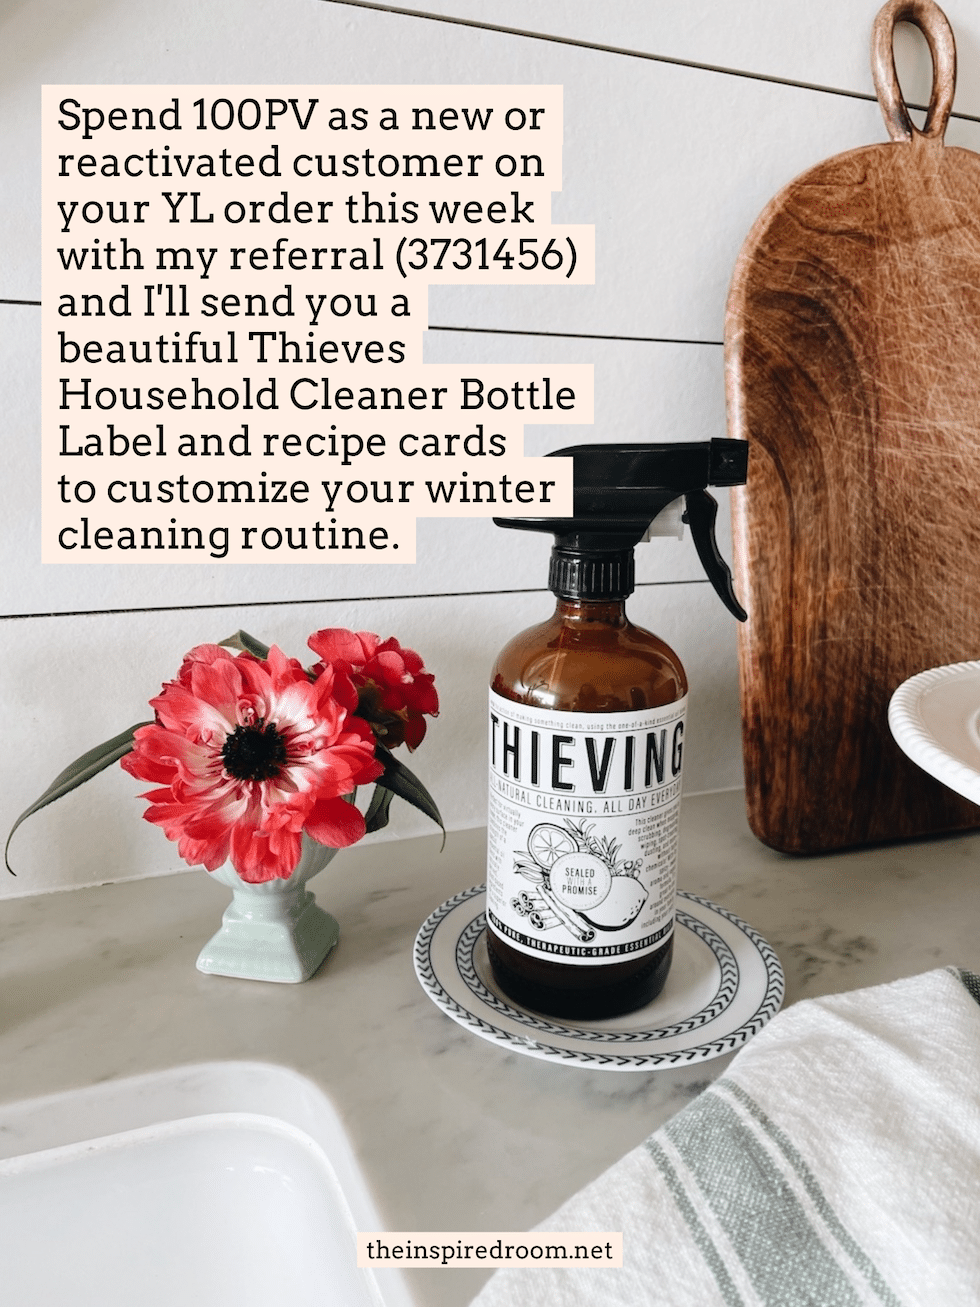 The Essential Oils You Need for Winter (+Diffuser Blends, Free Gifts and a Sale!)